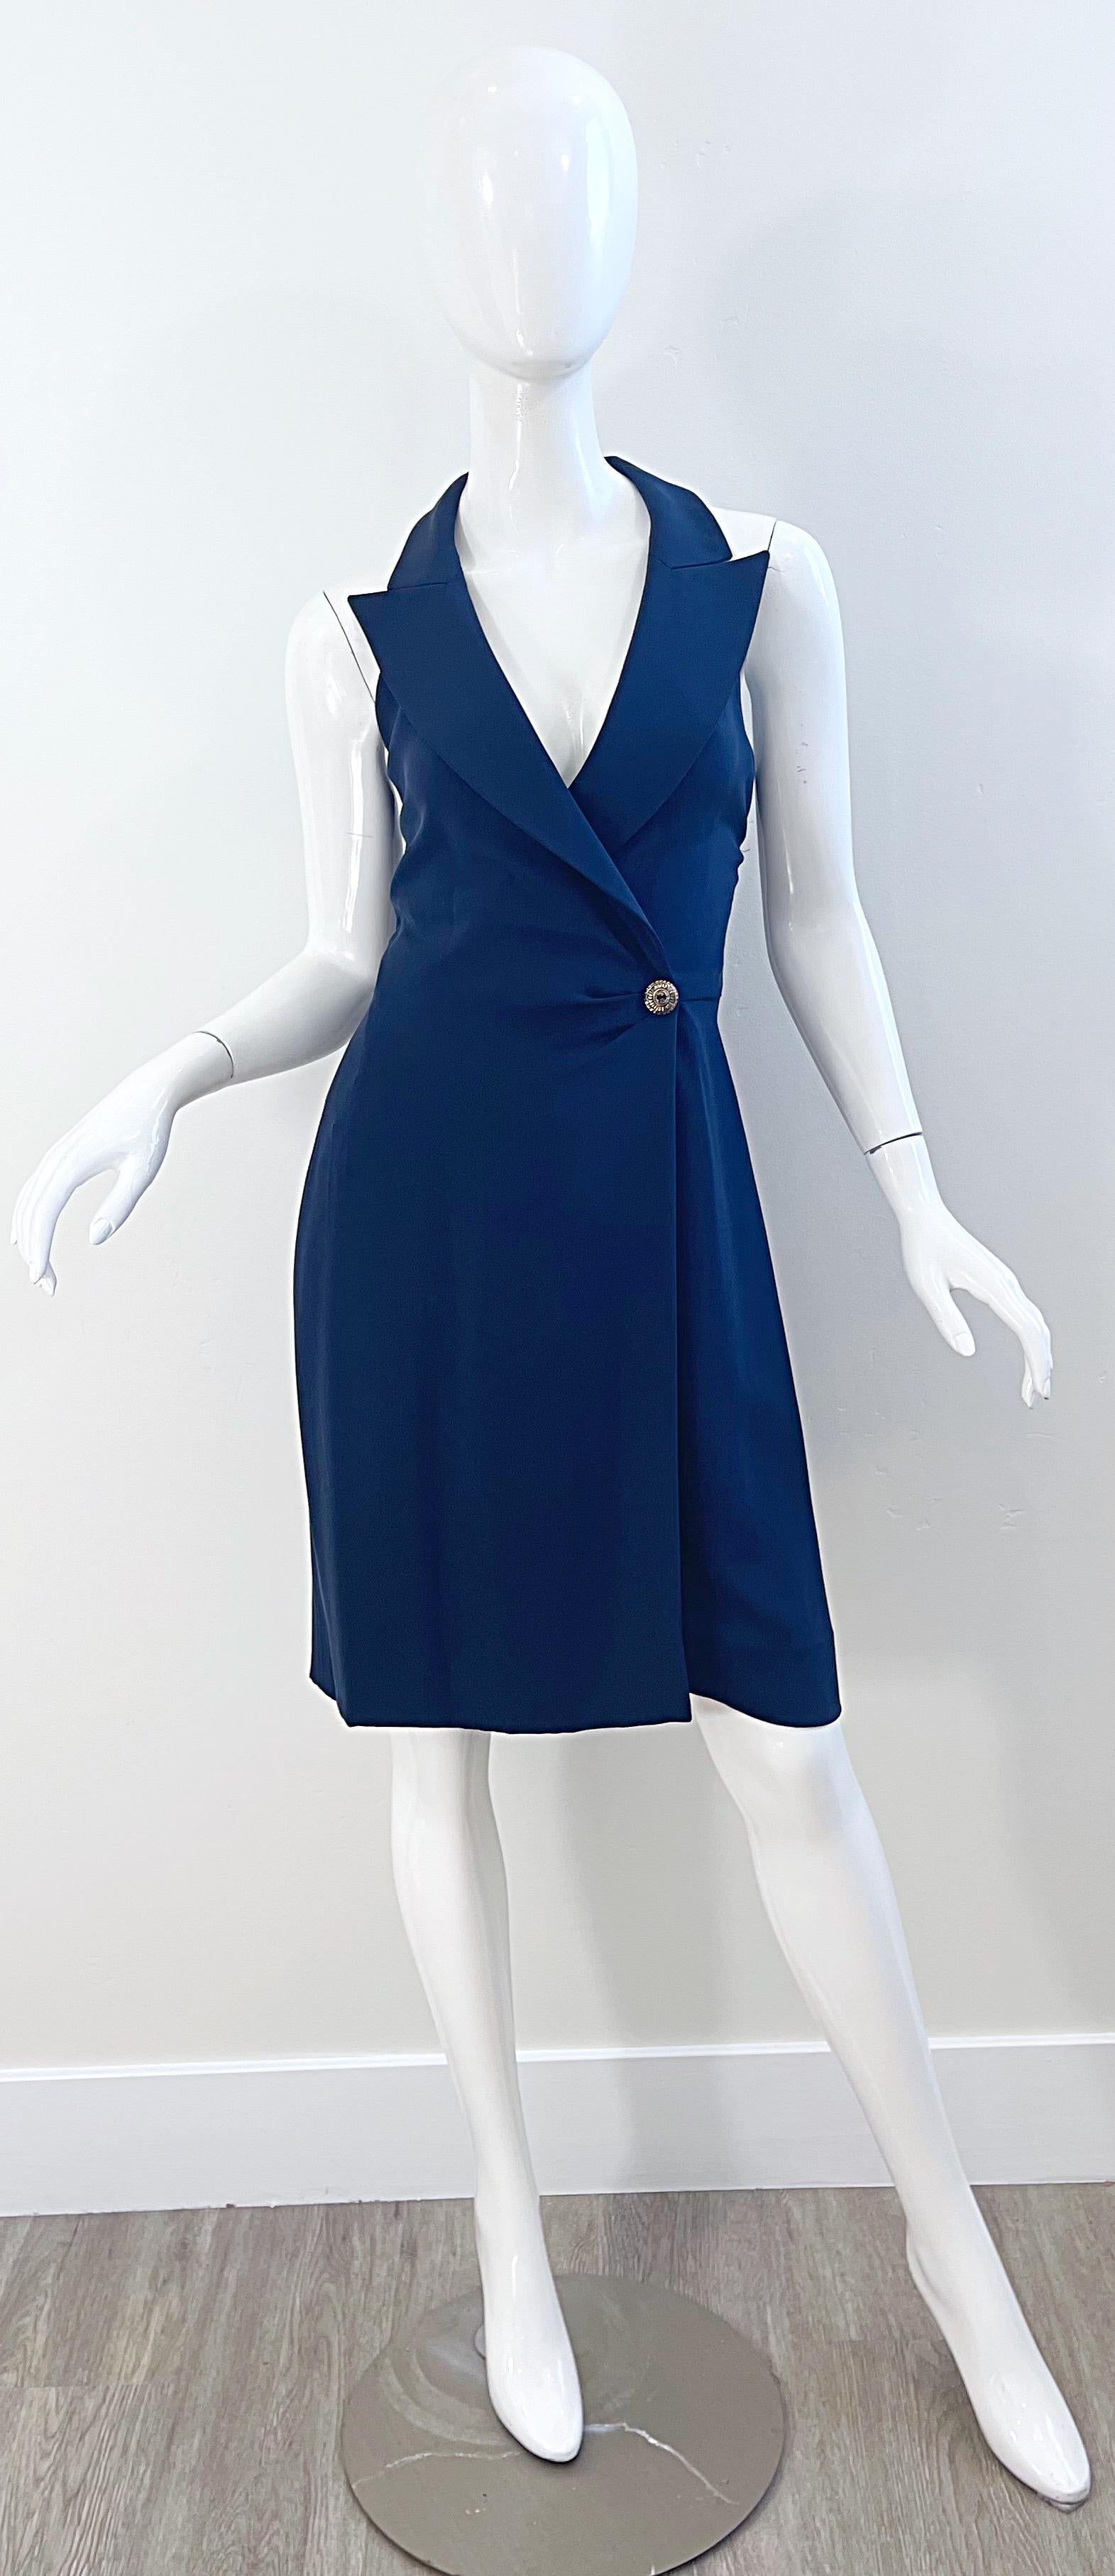 Chic 1990s YVES SAINT LAURENT Rive Gauche navy blue silk tuxedo style wrap dress ! Features a tailored bodice with signature YSL exaggerated lapels. Wrap style with silver button at the side and hidden hook-and-eye closure. Fully lined. The perfect